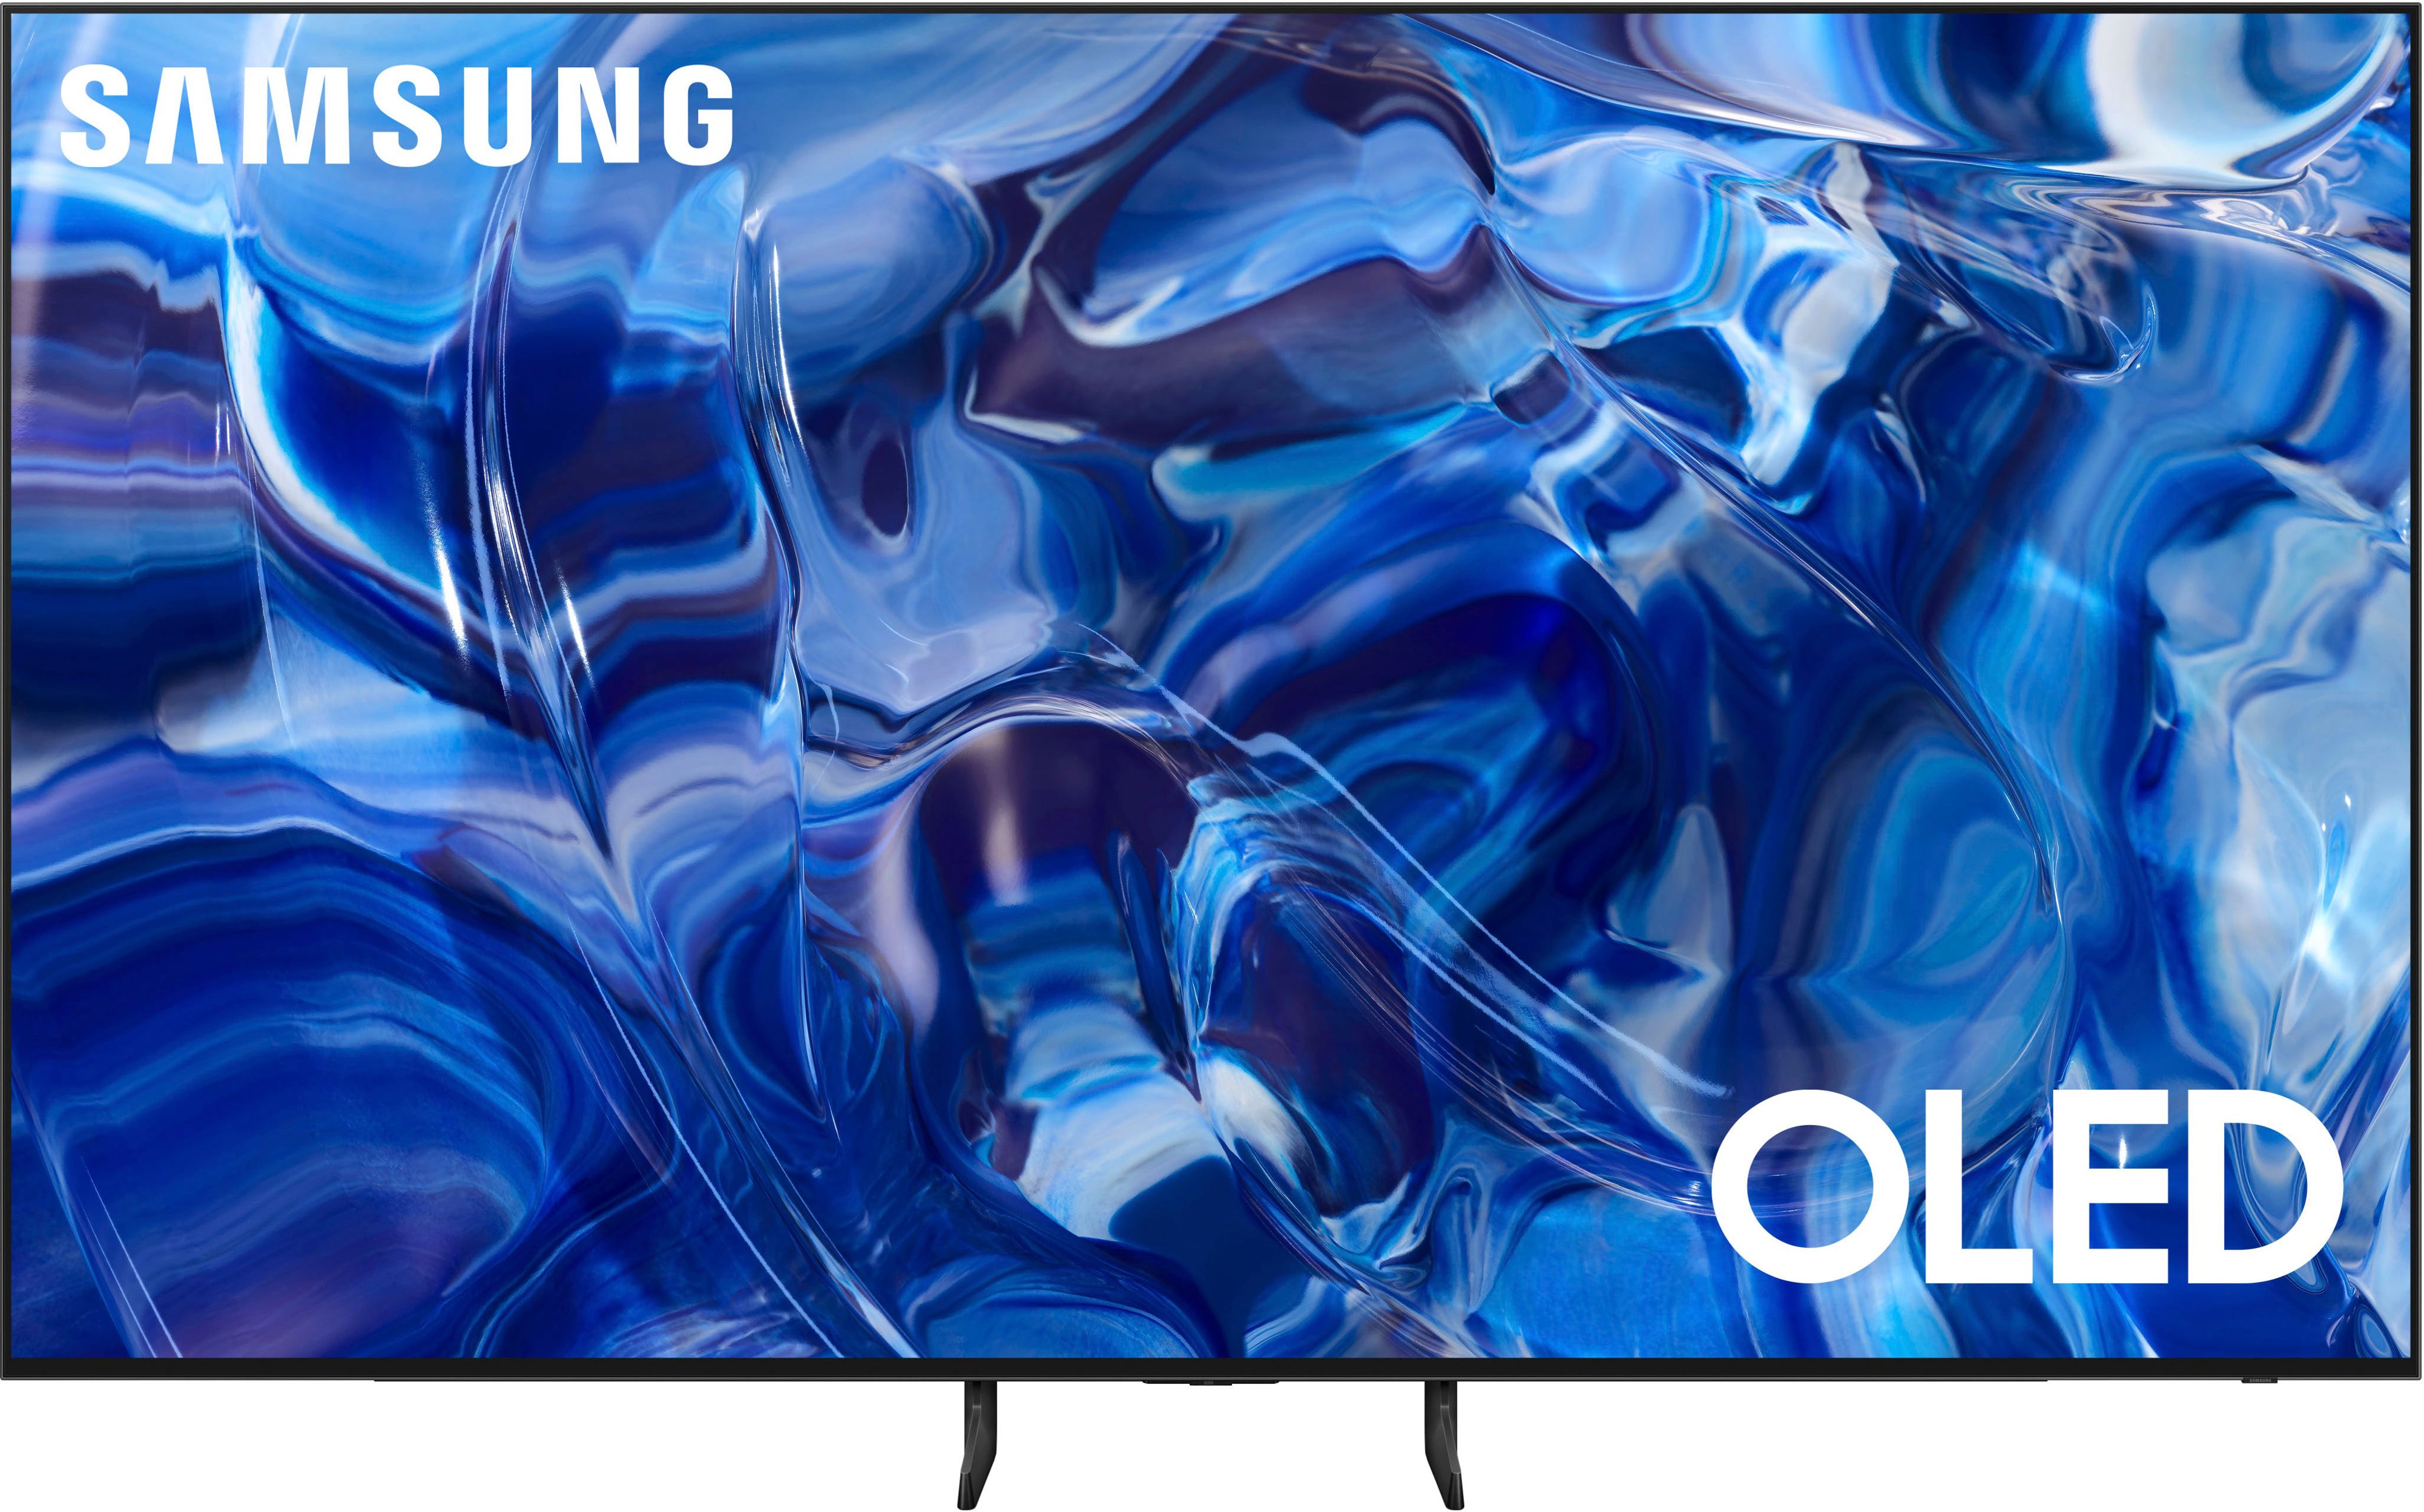 Samsung S89C 77" QD-OLED Television $1699 with free installation and $100 GC at Best Buy ...YMMV $1700